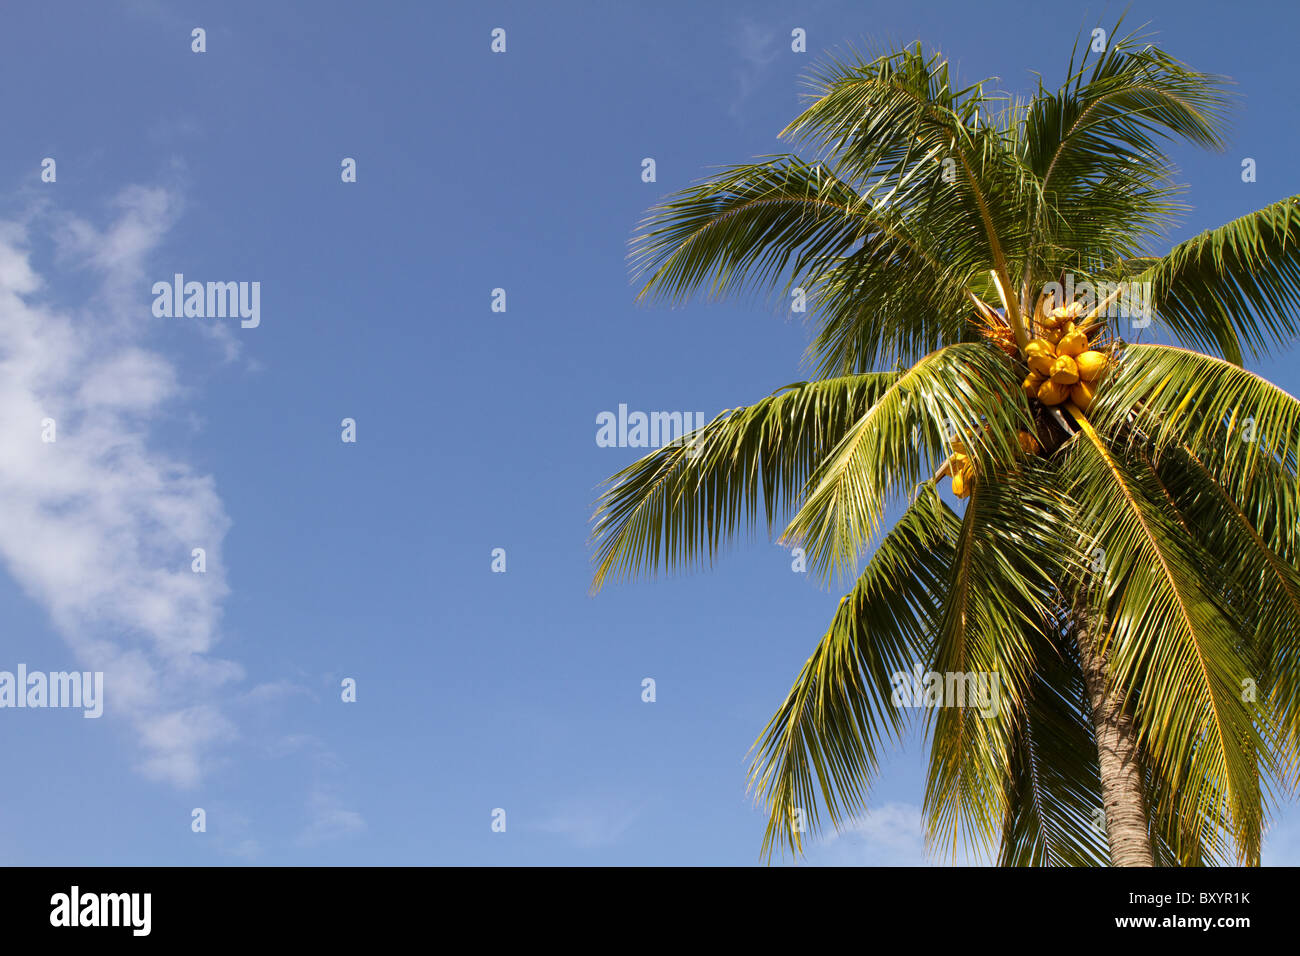 Golden colored coconuts grow on the palm tree in the tropics against a blue sky. Room for copy on left. Stock Photo